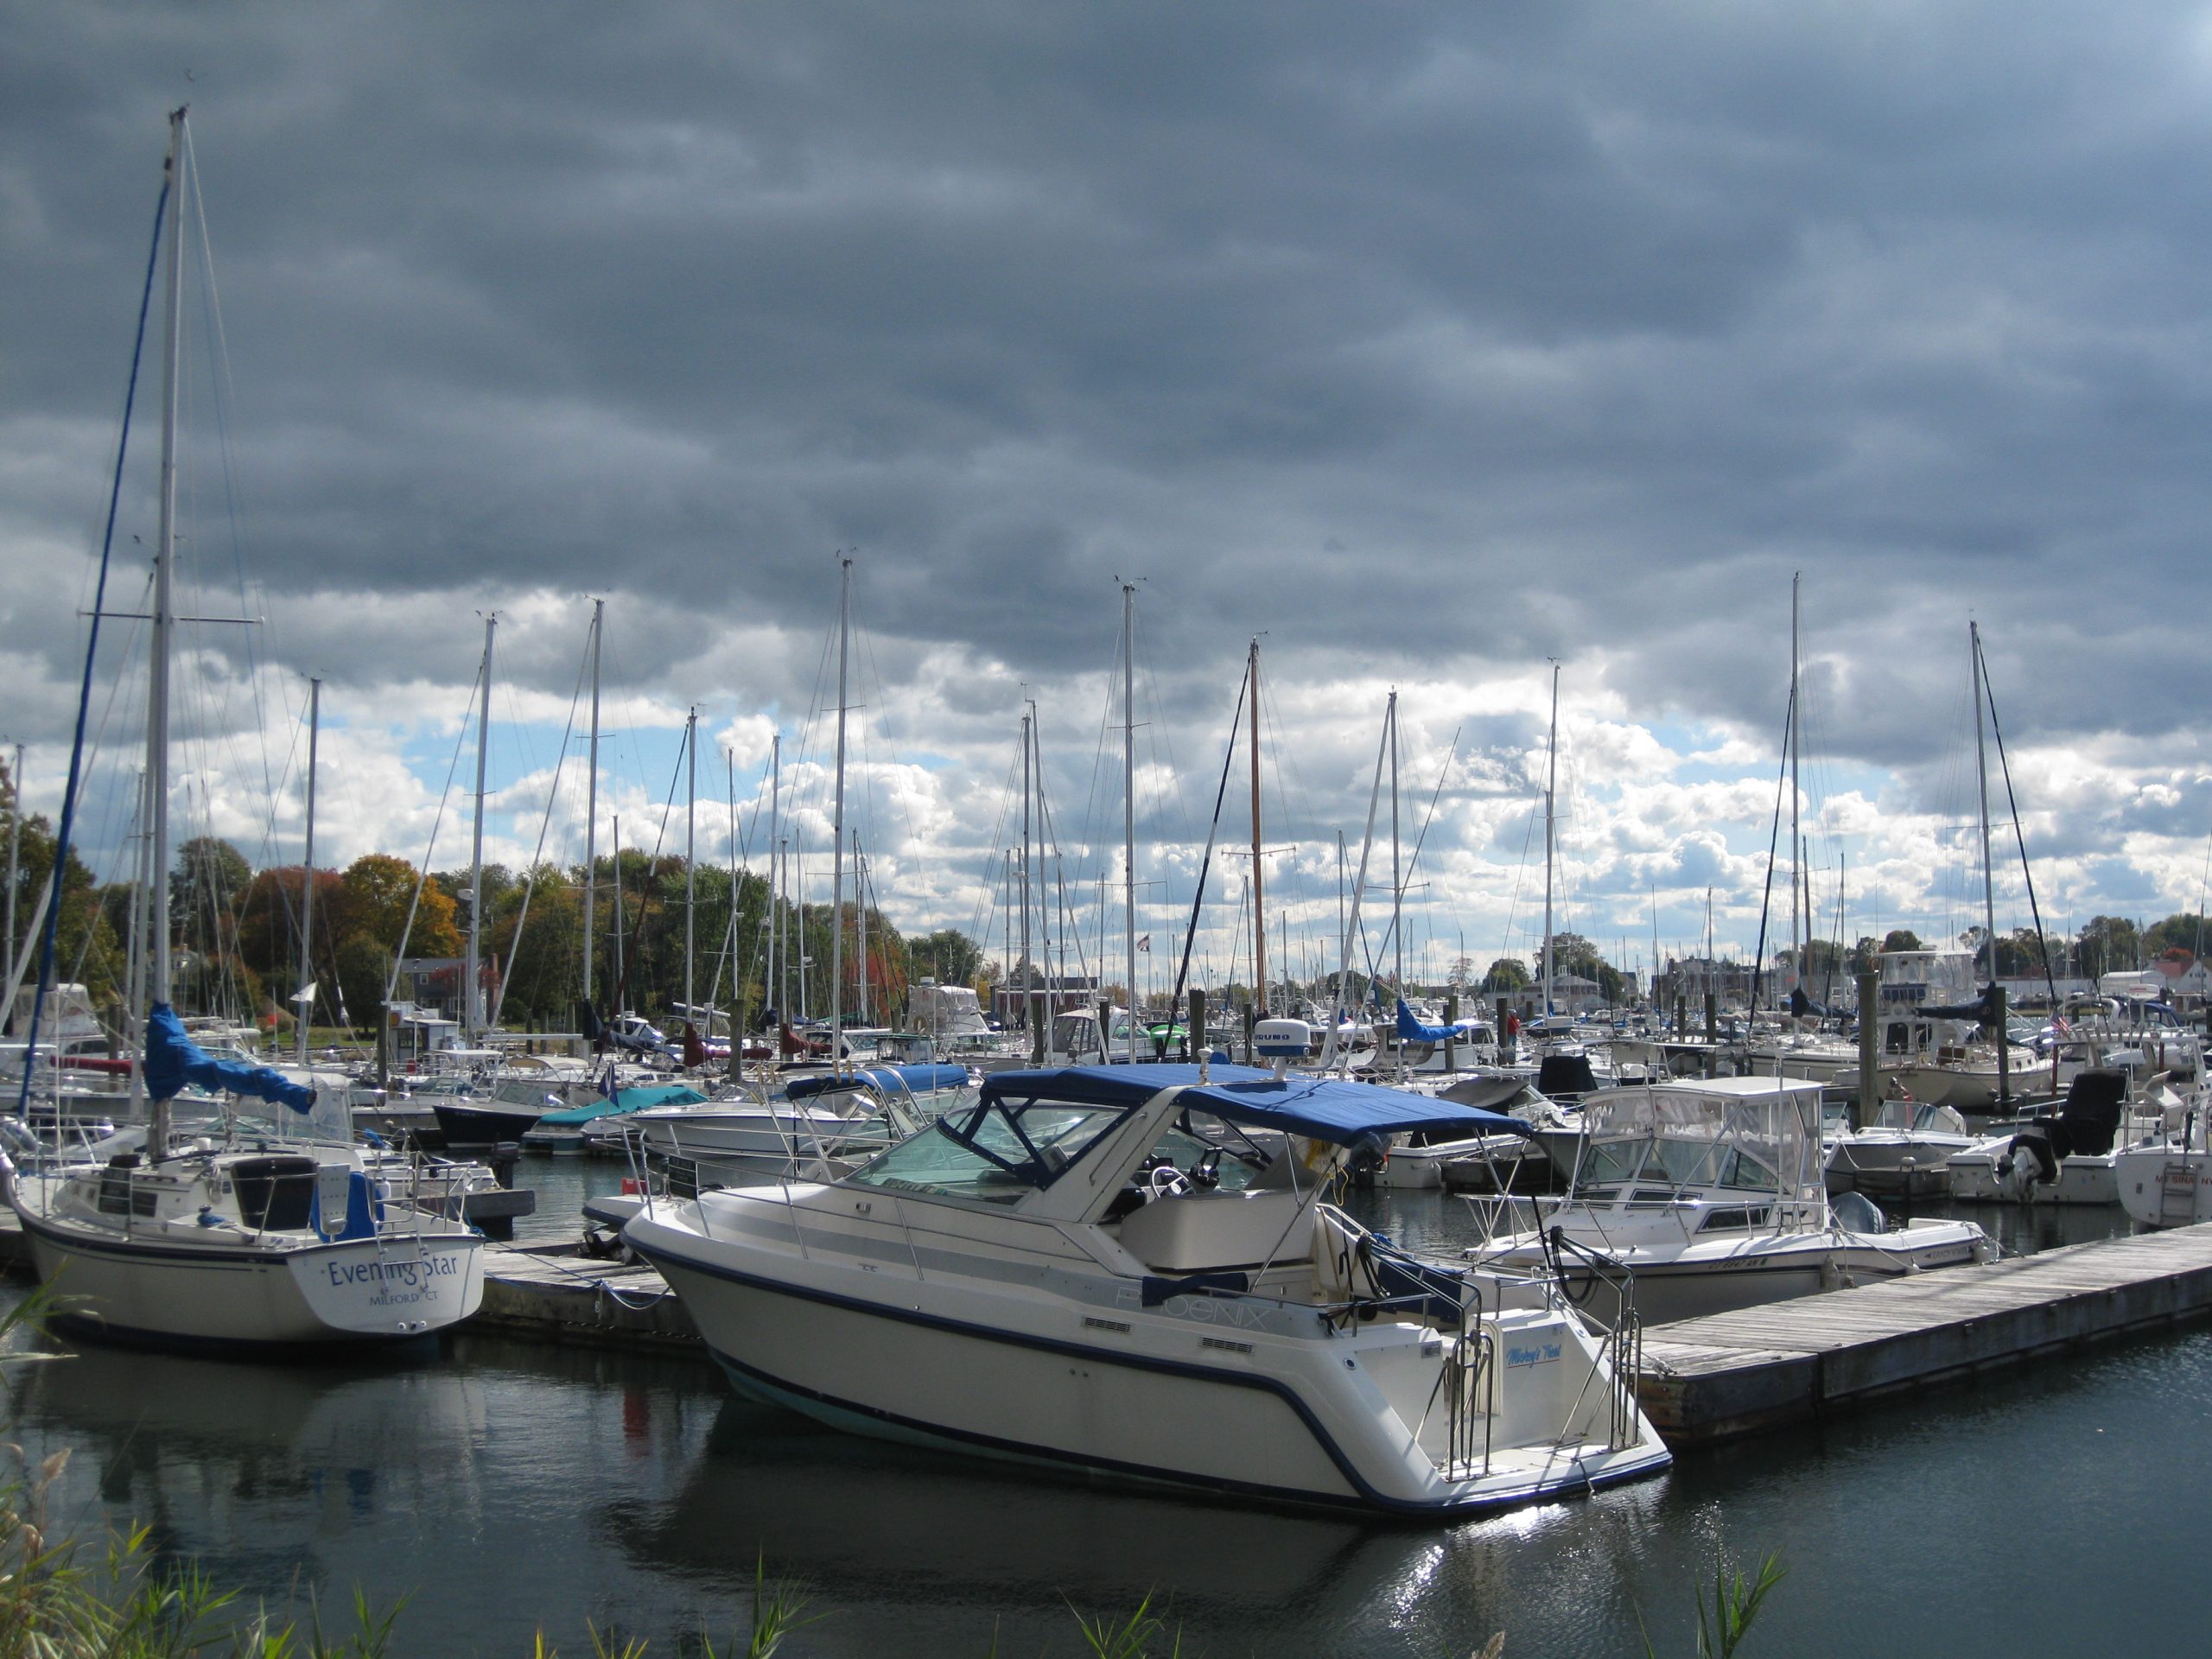 Boats In The Harbor (user submitted)